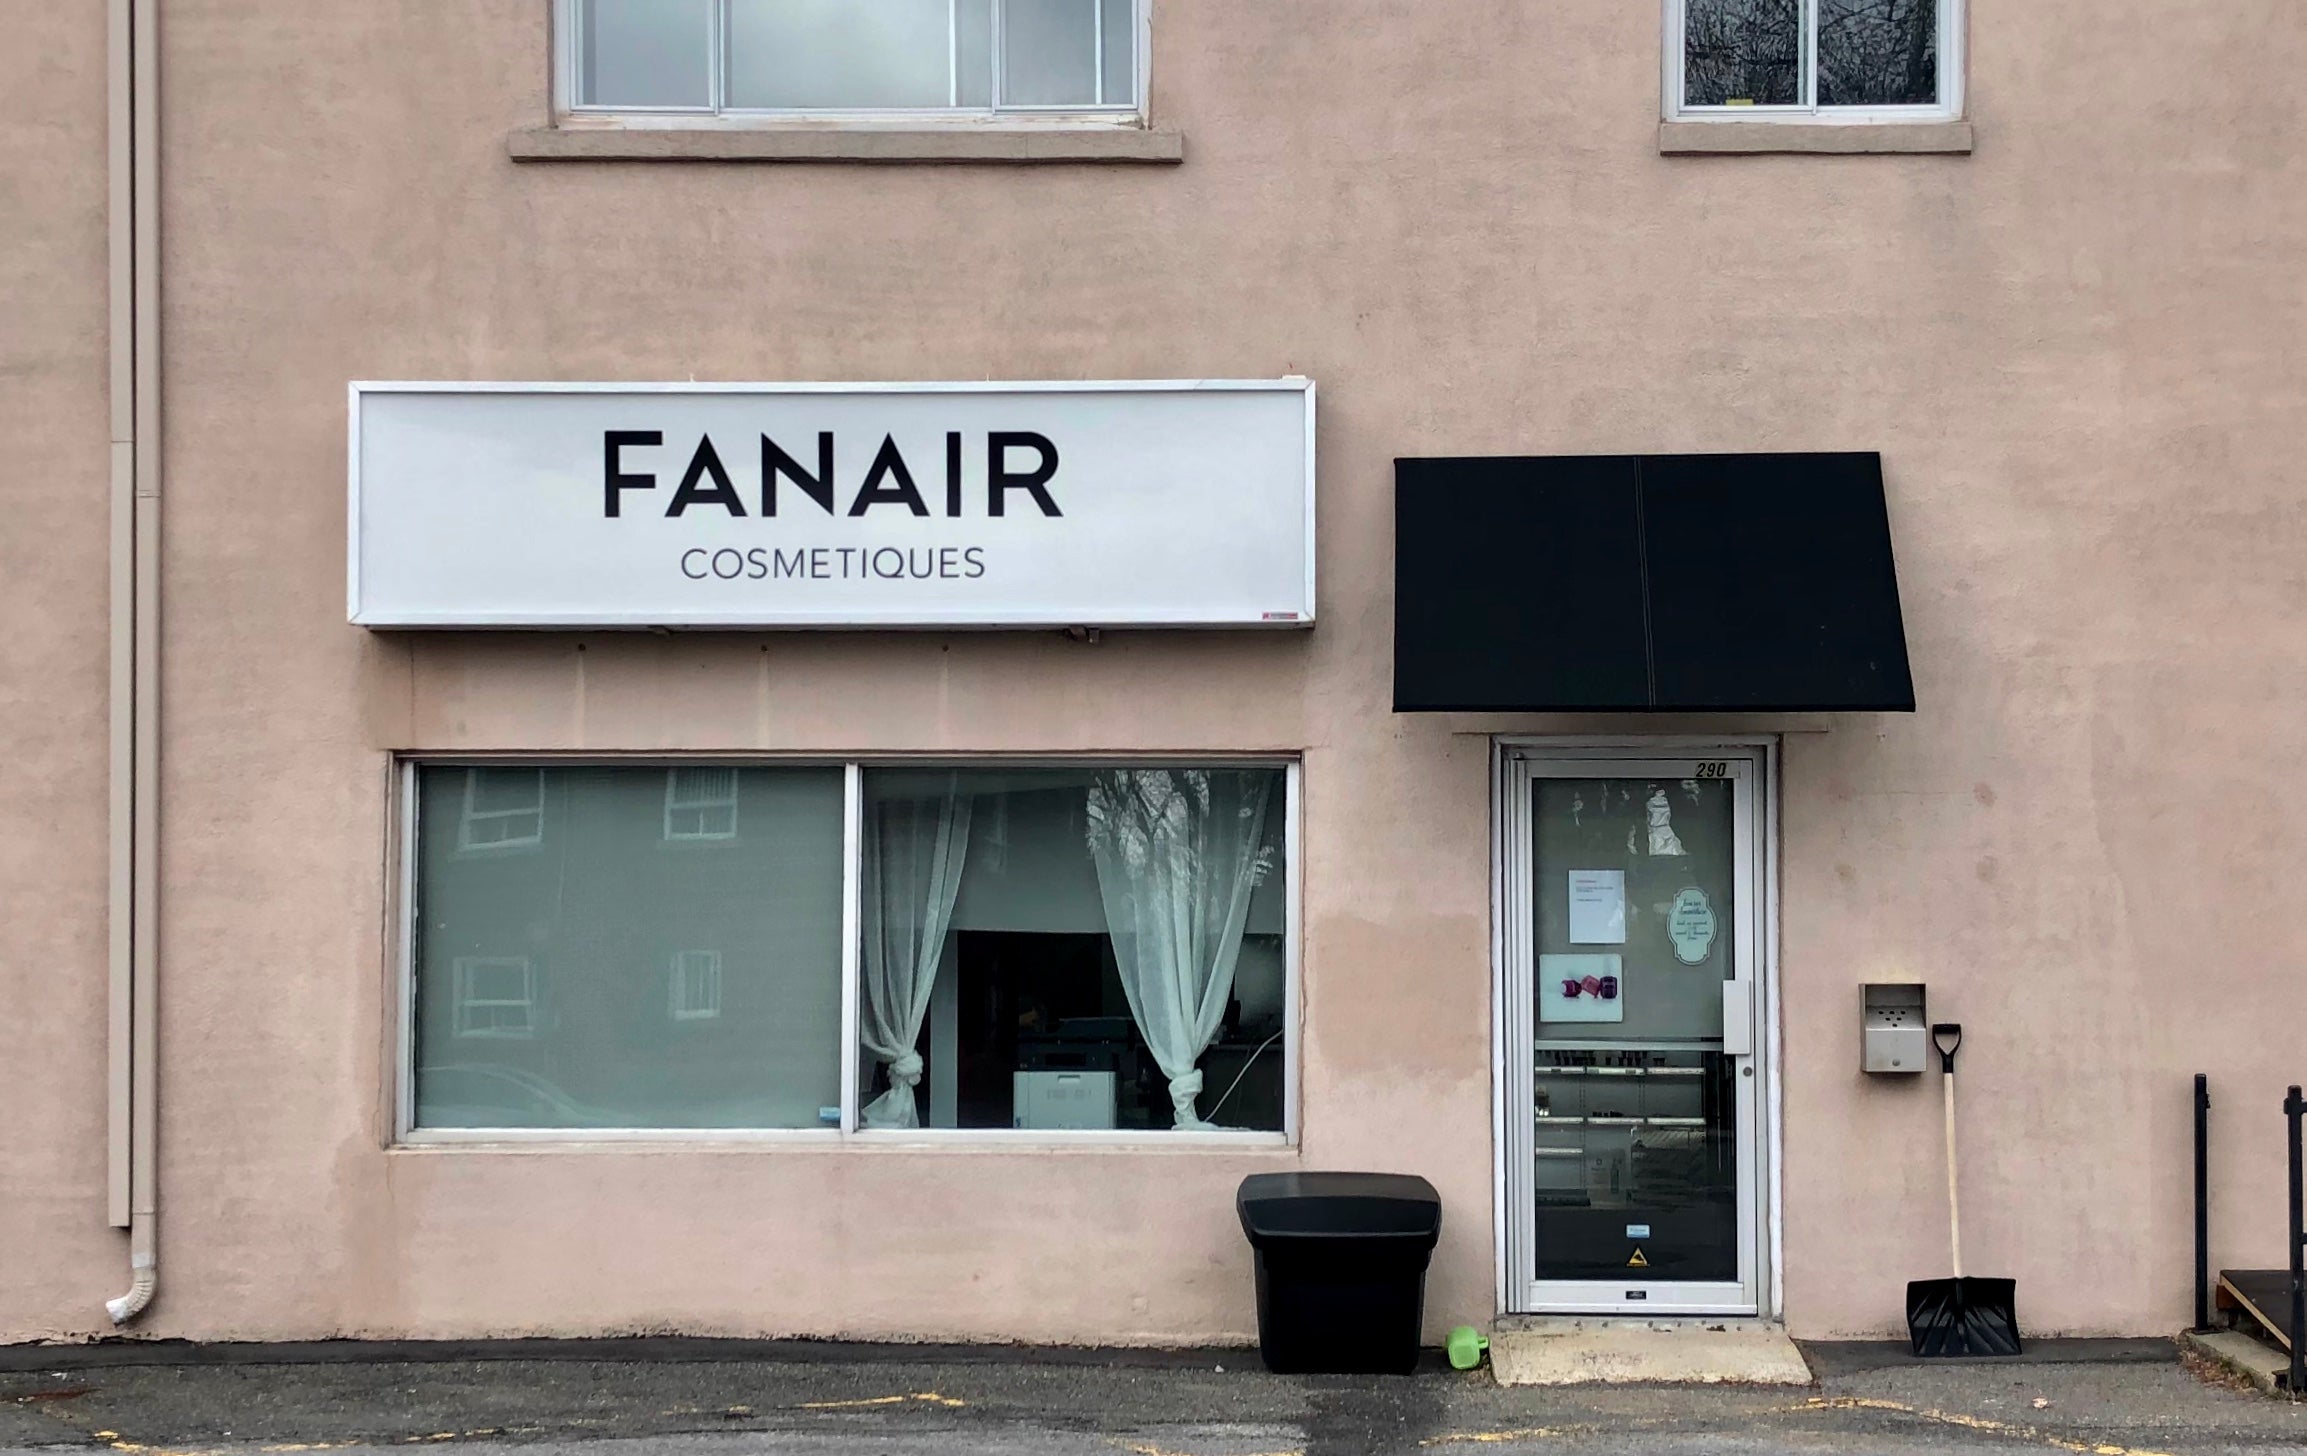 Fanair Cosmetiques location show room